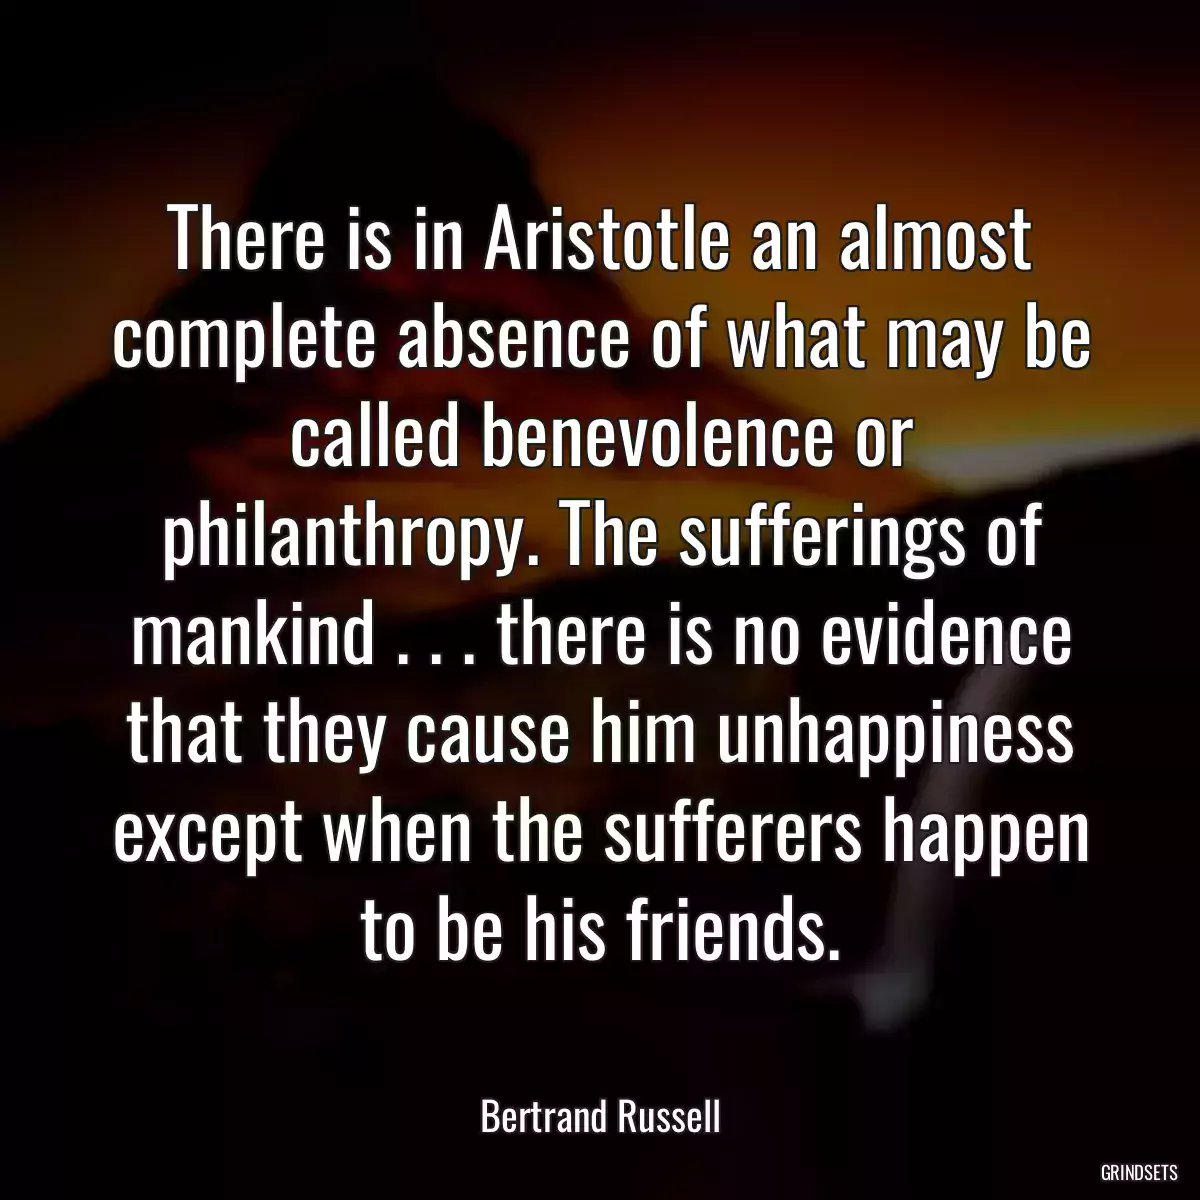 There is in Aristotle an almost complete absence of what may be called benevolence or philanthropy. The sufferings of mankind . . . there is no evidence that they cause him unhappiness except when the sufferers happen to be his friends.